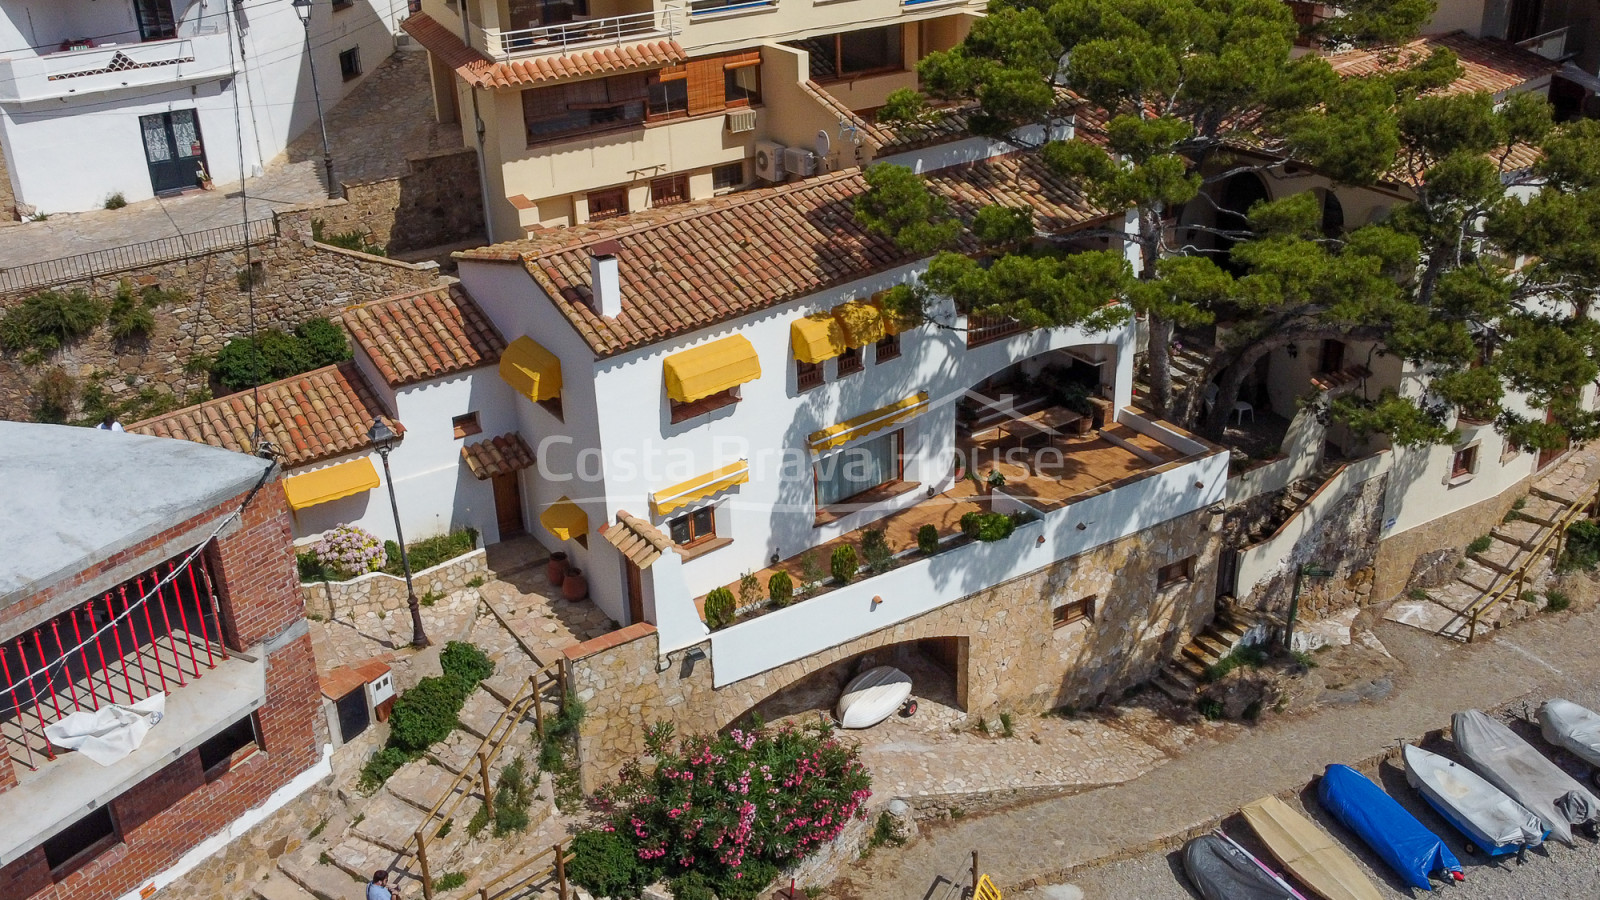 Exclusive seafront villa for sale in Sa Tuna (Begur) with hangar-boat just on the beach.